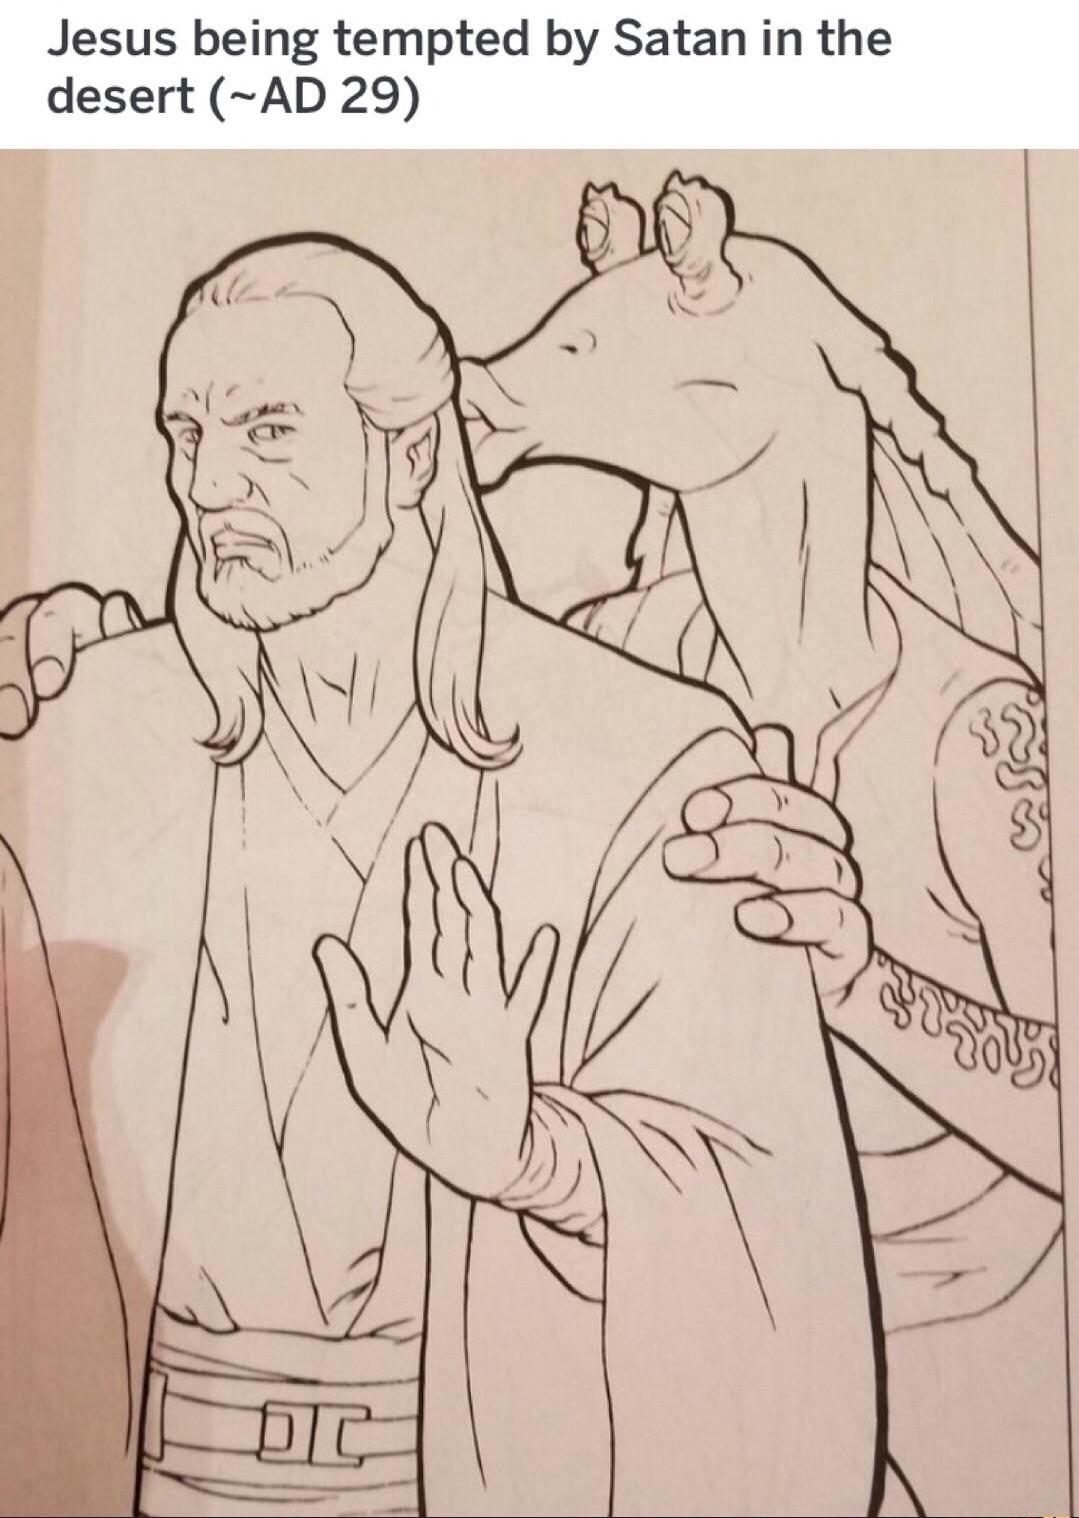 JeSUs TemPTEd By SaTan